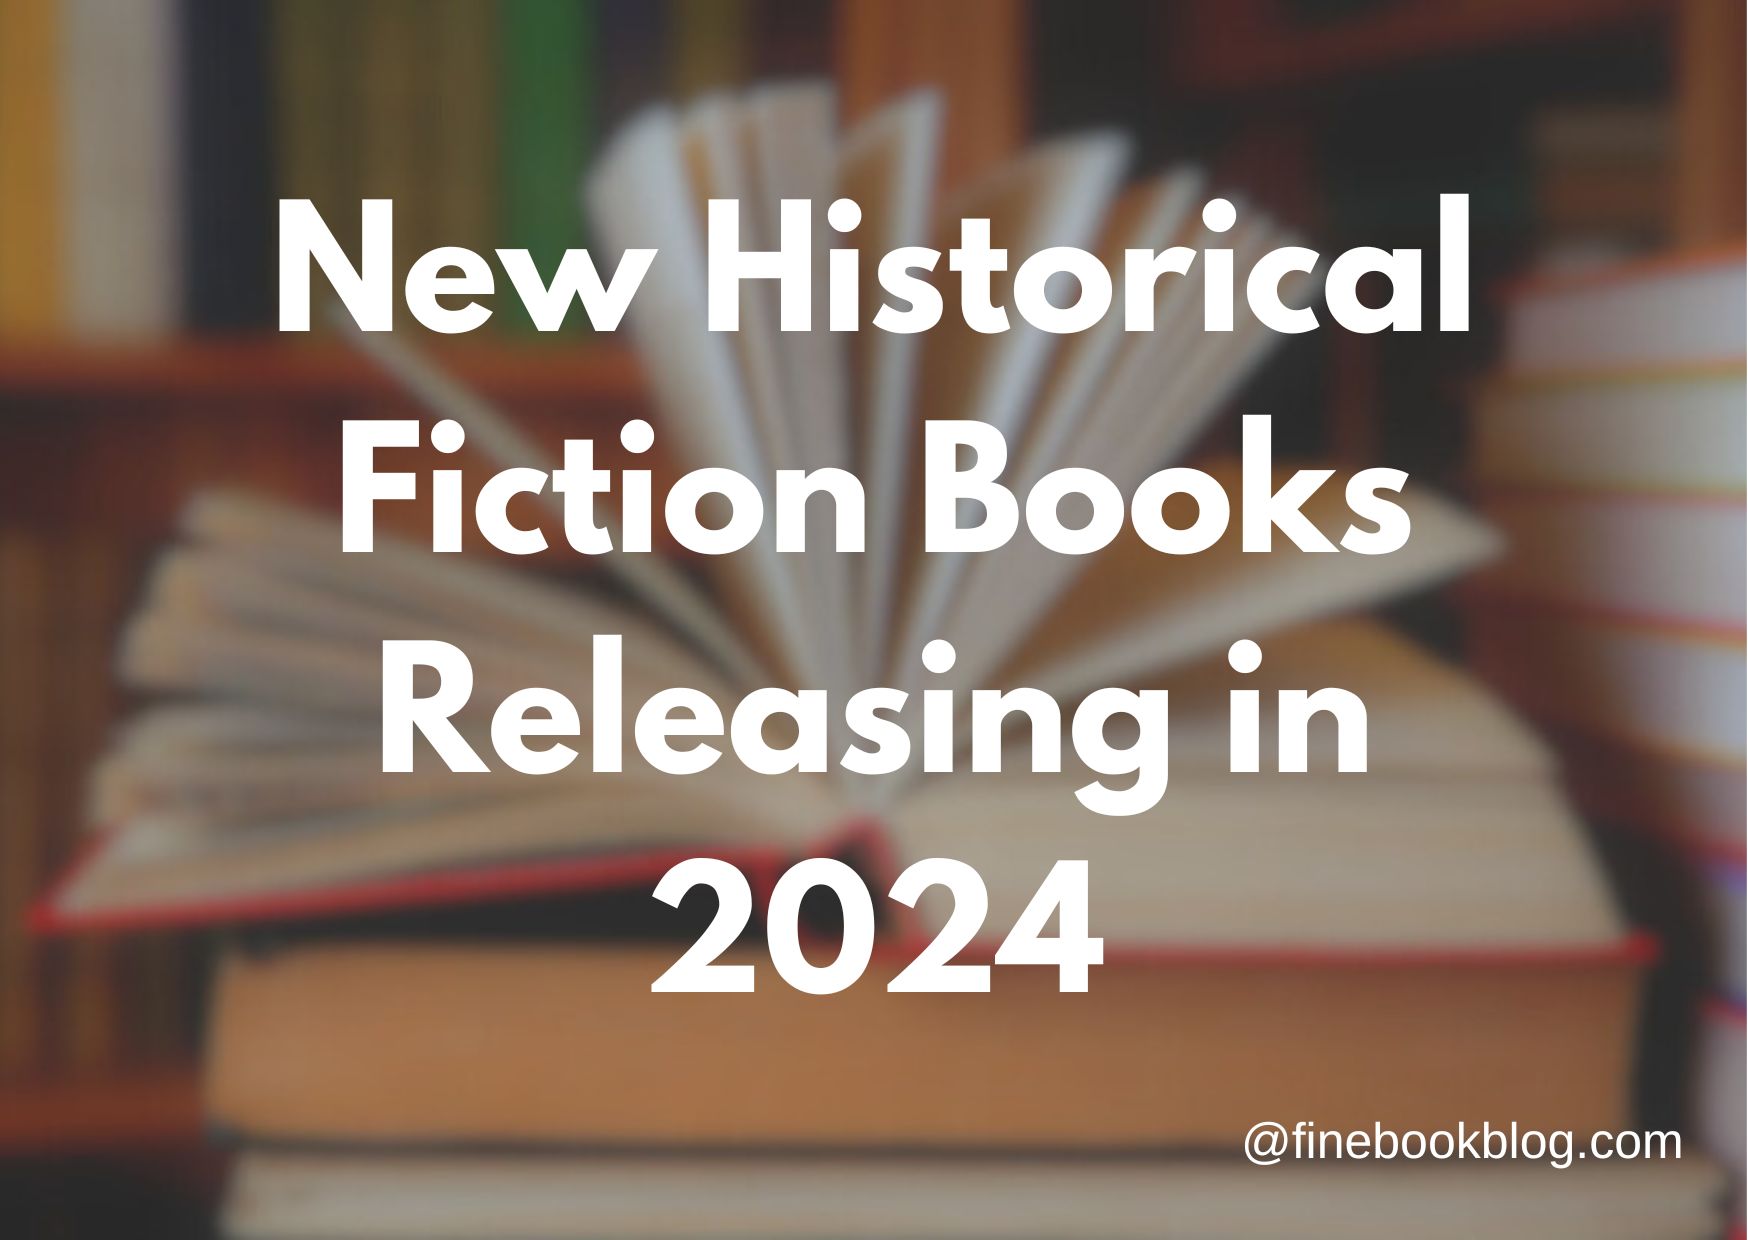 New Historical Fiction To Read in 2024